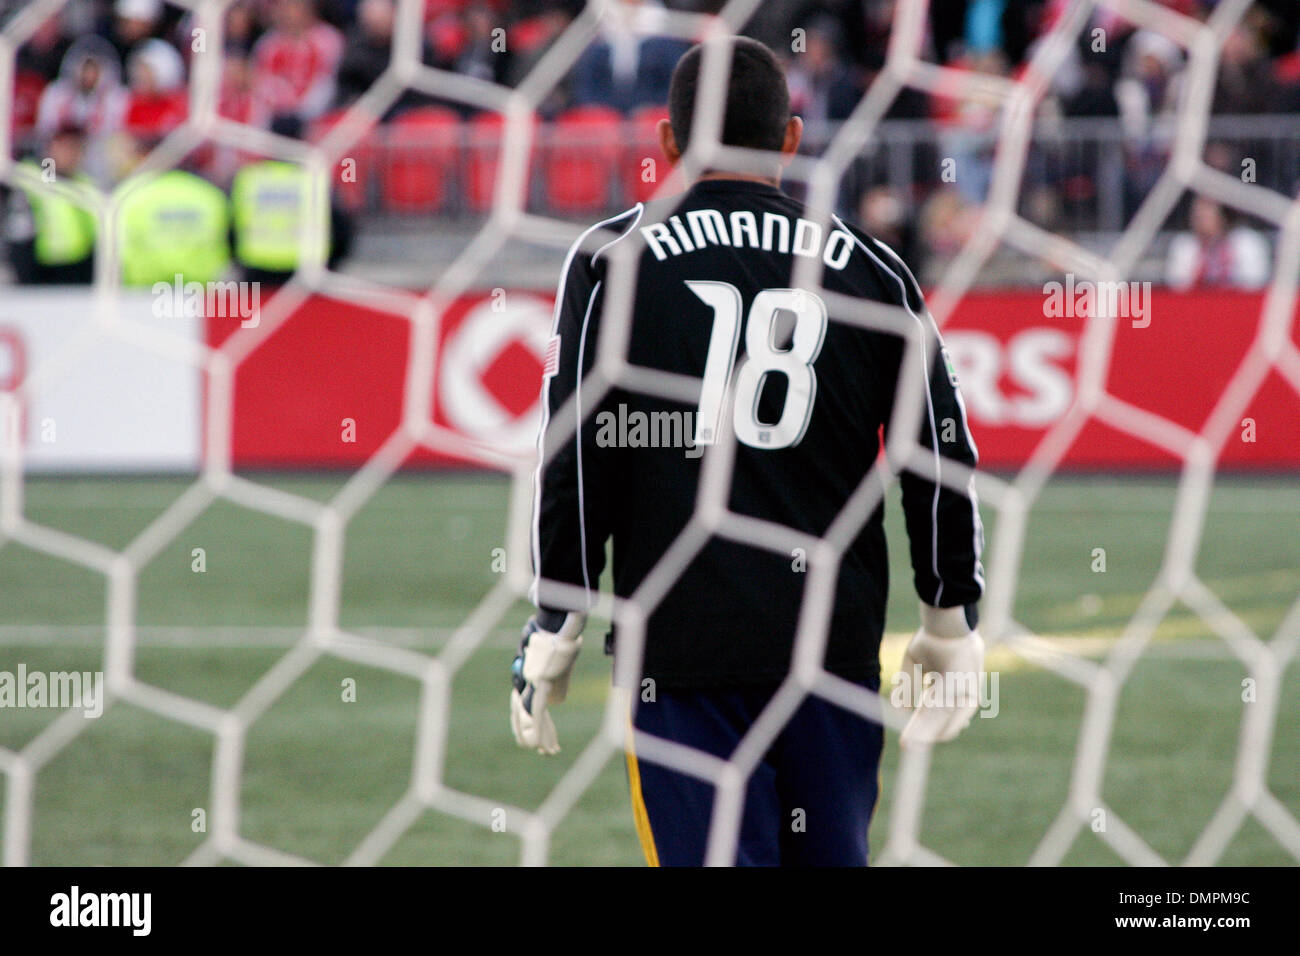 Oct. 18, 2009 - Toronto, Ontario, Canada - 17 October 2009:  Nick Rimando #18 of Real Salt Lake reacts to giving up a goal giving the Toronto FC the lead. Real Salt Lake were defeated by the Toronto FC 1-0 at BMO Field, Toronto, ON. (Credit Image: © Steve Dormer/Southcreek Global/ZUMApress.com) Stock Photo